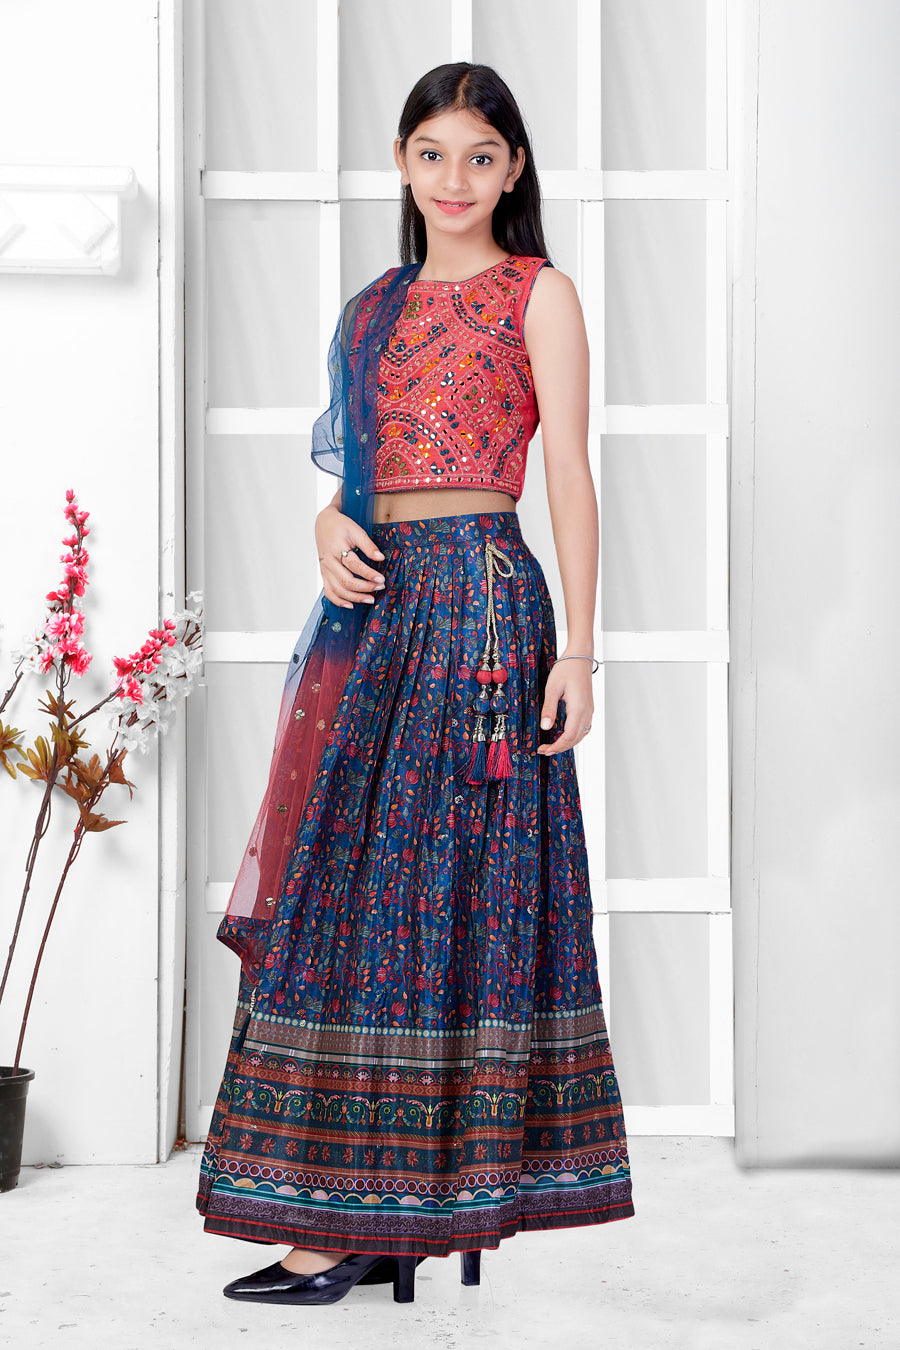 Style of Lehenga For Garba Nights With Ethnic Touch